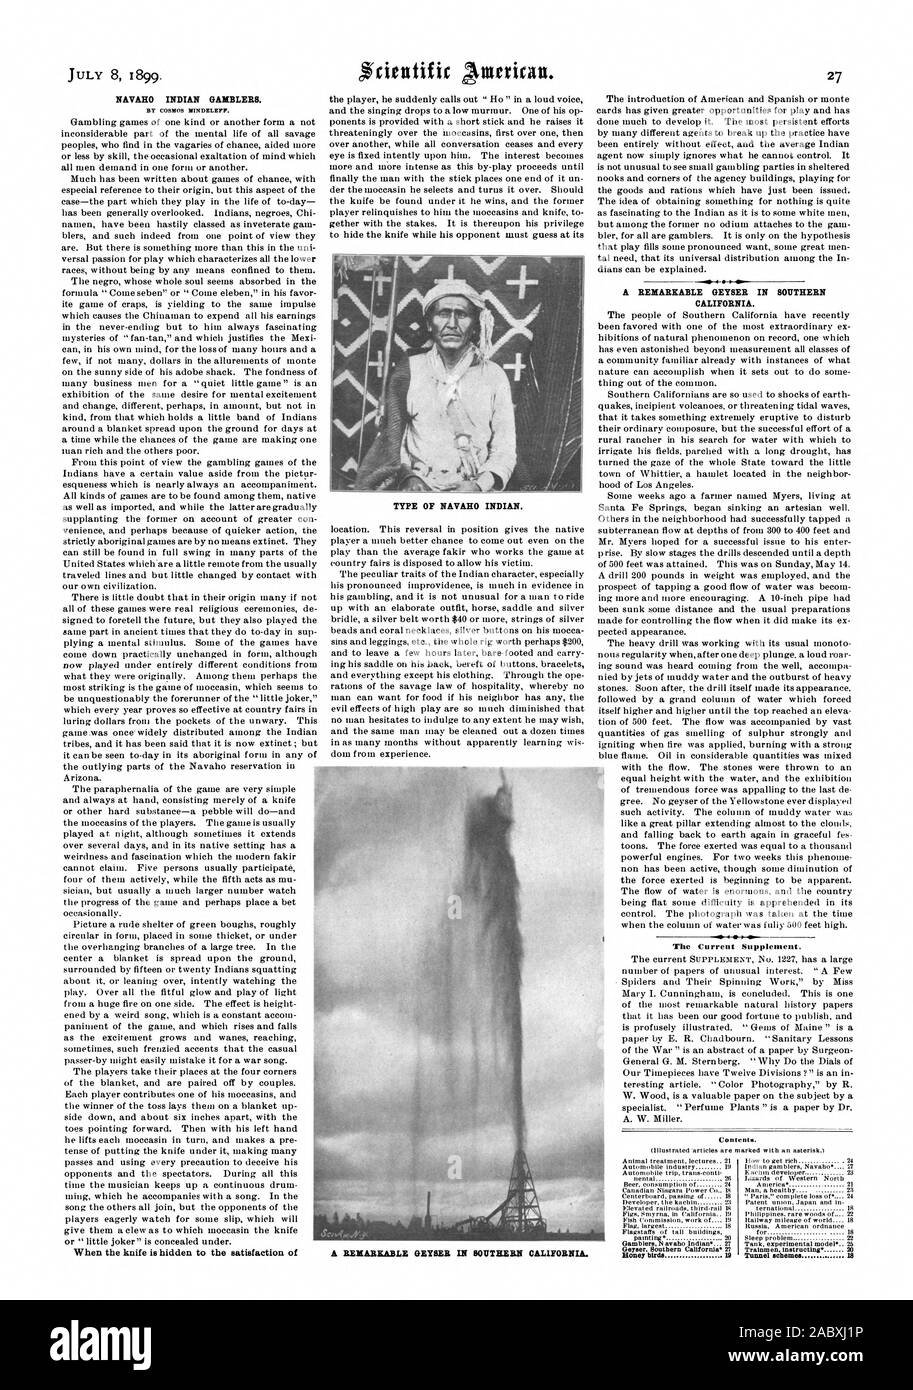 A REMARKABLE GEYSER IN SOUTHERN CALIFORNIA. NAVAHO INDIAN GAMBLERS. BY COSMOS M1NDELEFF. When the knife is hidden to the satisfaction of A REMARKABLE GEYSER IN SOUTHERN CALIFORNIA. The Current Supplement. Contents. Geyser Southern California 27 Honey birds 19, scientific american, 1899-07-08 Stock Photo